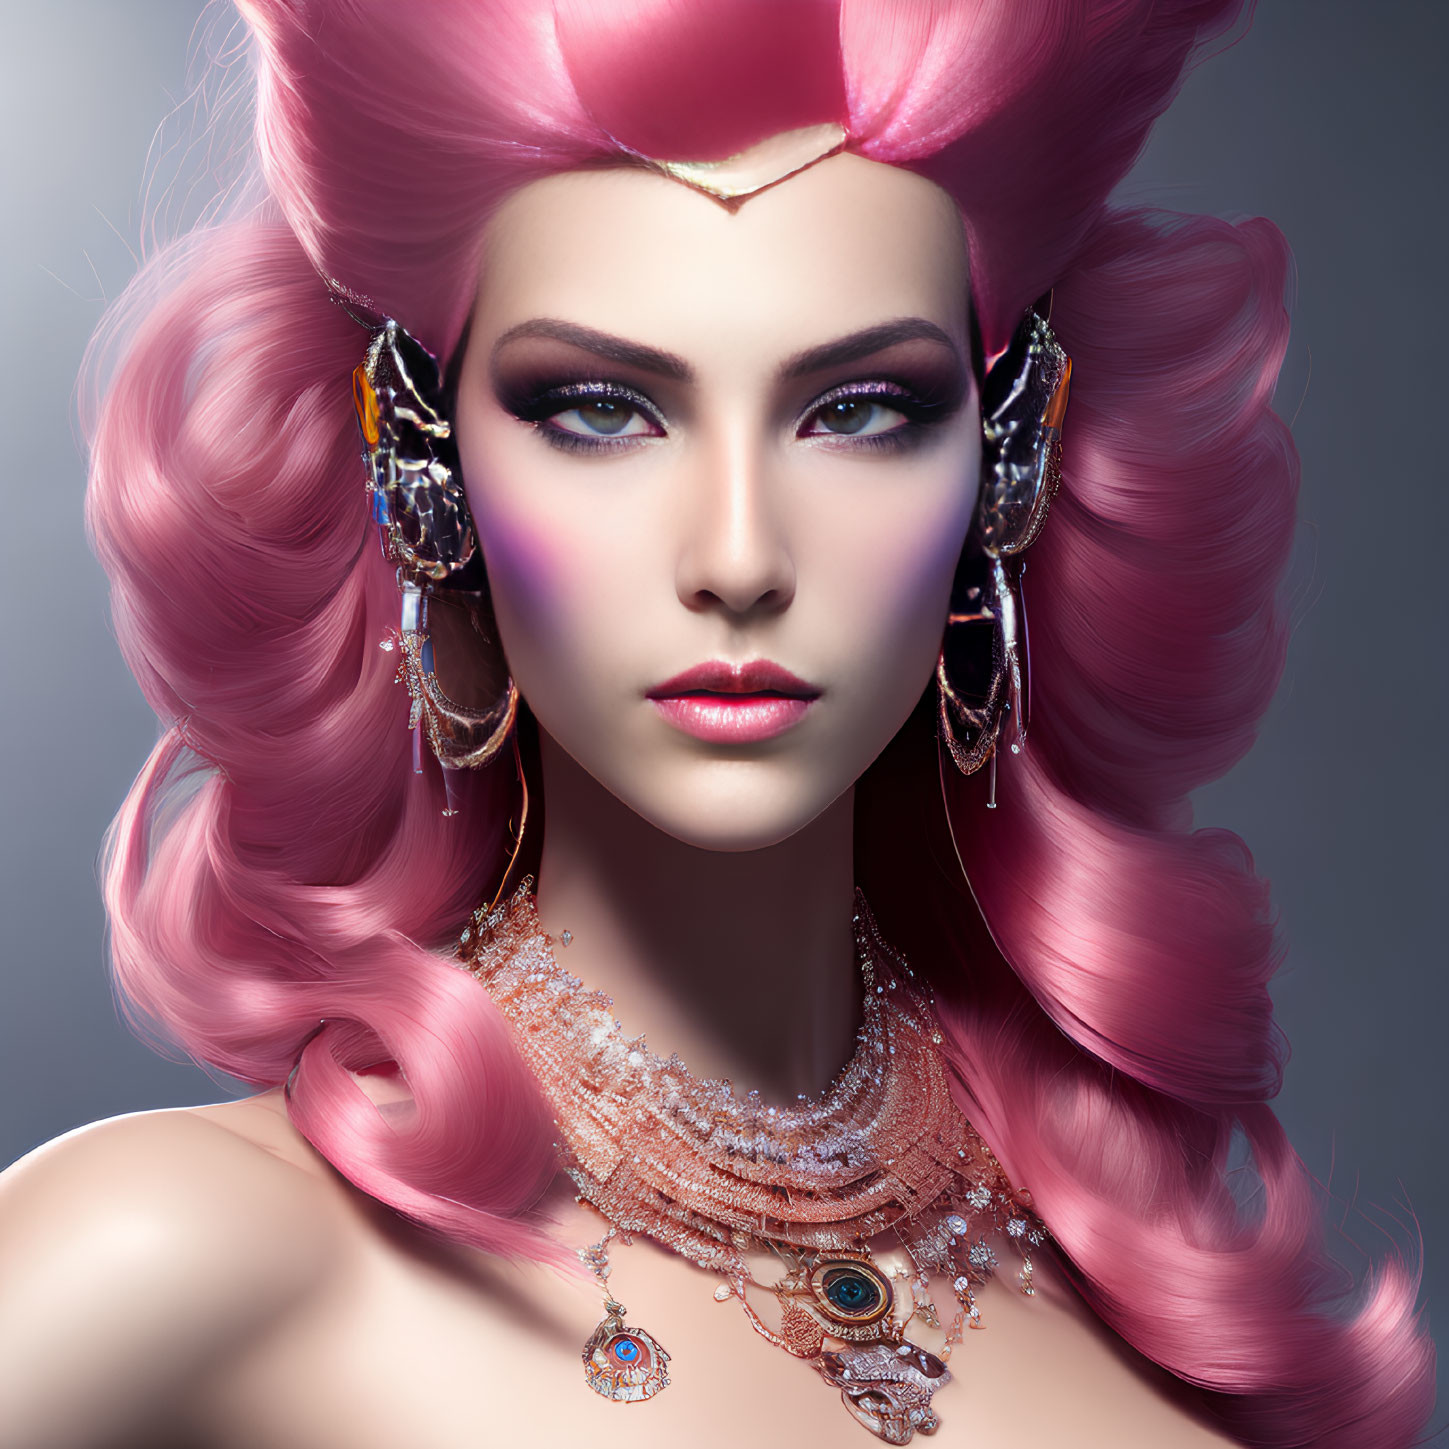 Stylized female with pink hair and ornate accessories on grey backdrop